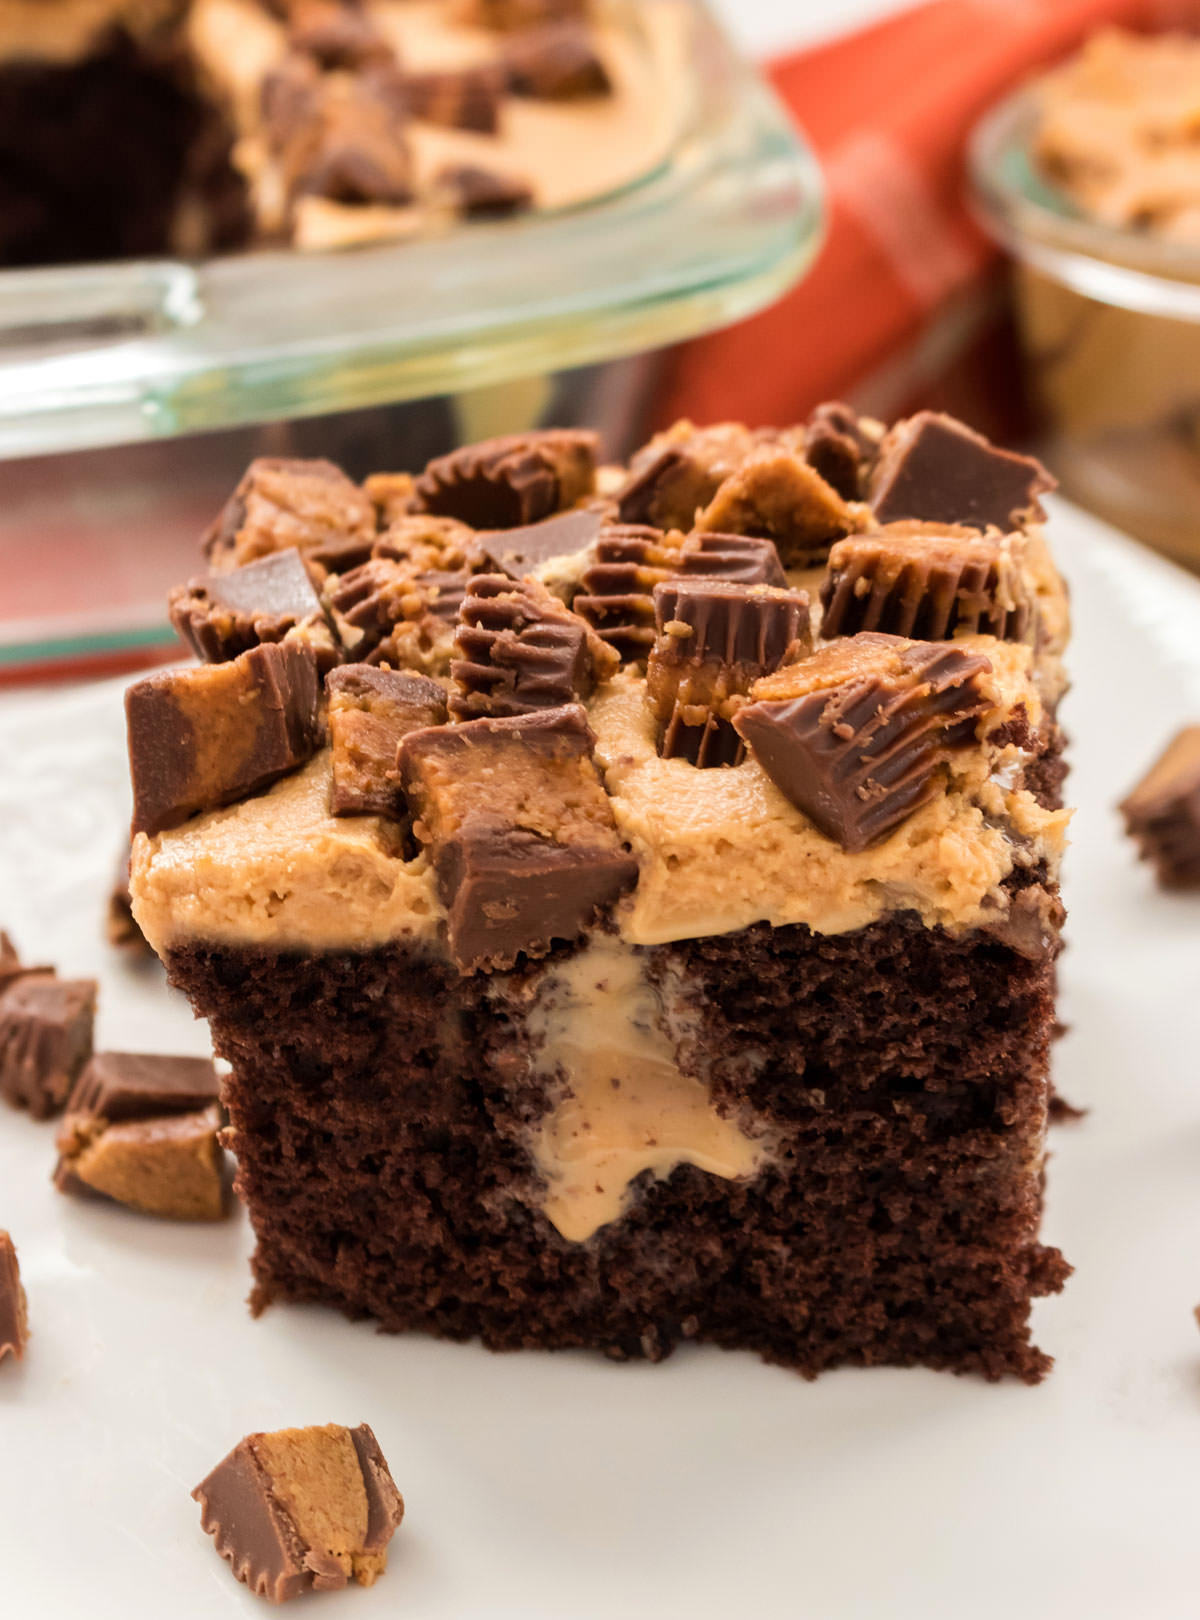 Closeup on a single piece of Chocolate Peanut Butter Poke Cake sitting on a white plate surrounded by pieces of Mini Reese's Peanut Butter Cups.